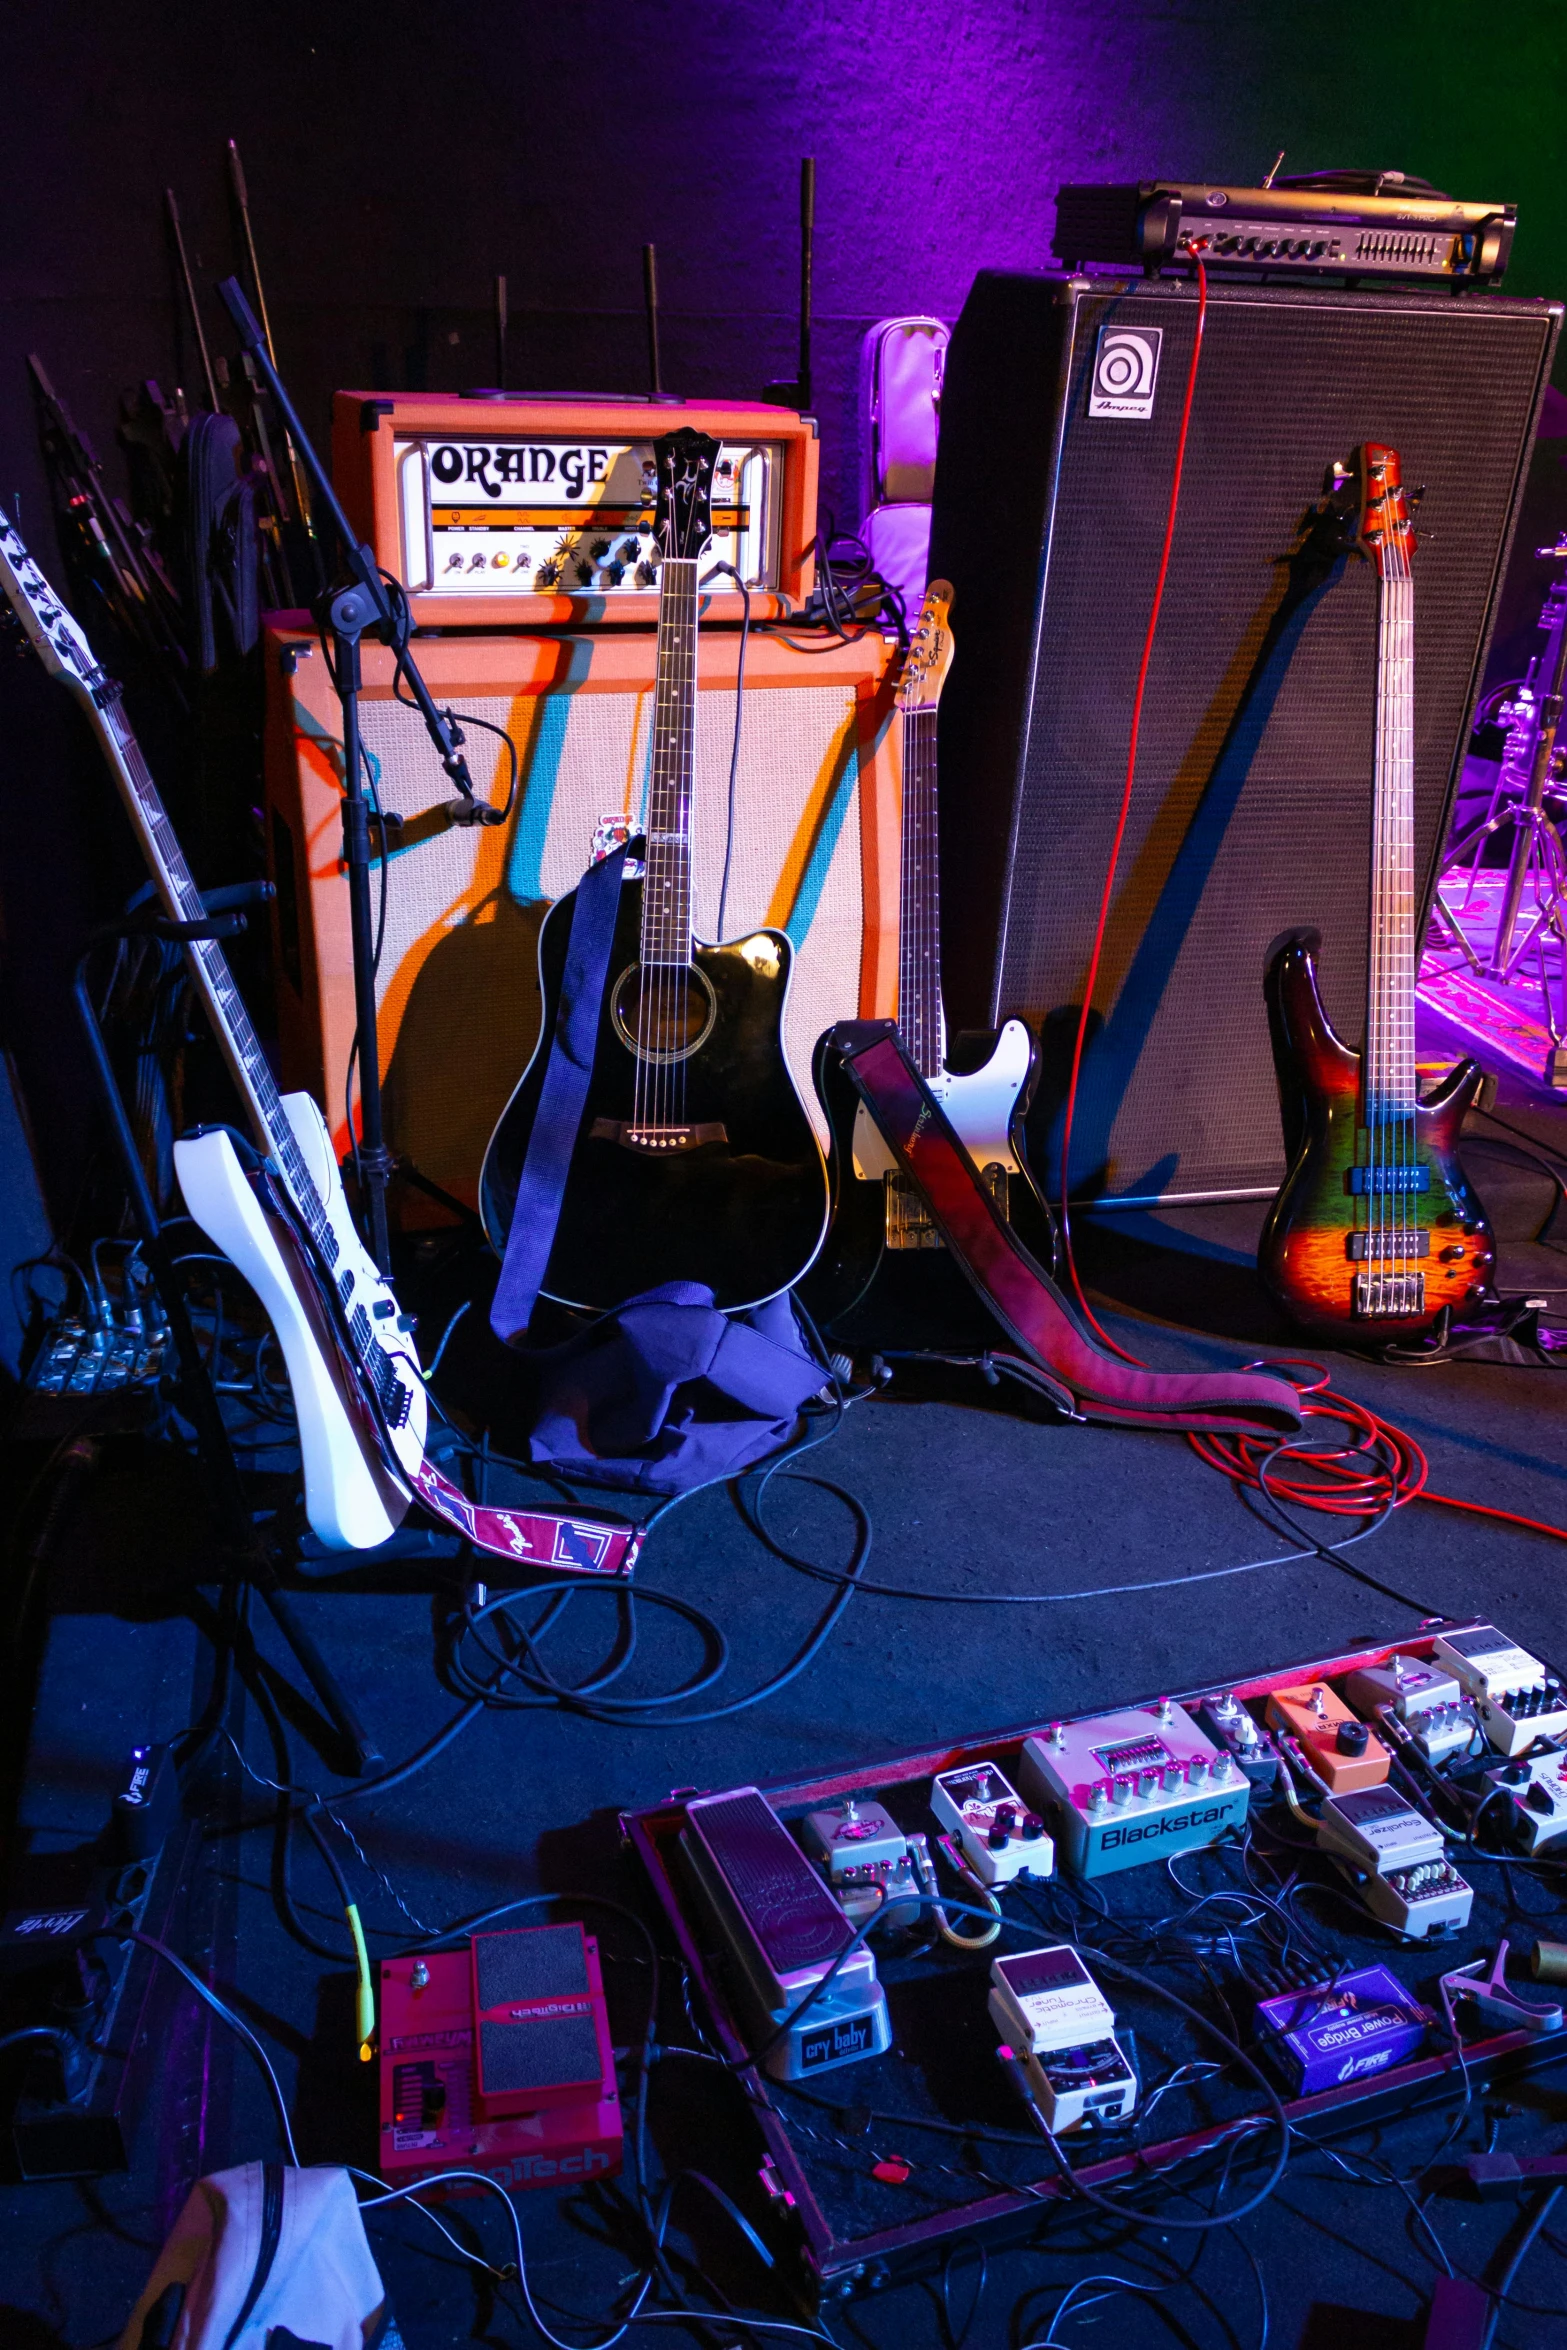 a group of guitars sitting on top of a stage, cable plugged into cyberdeck, purple scene lighting, wires and cords, the backroom